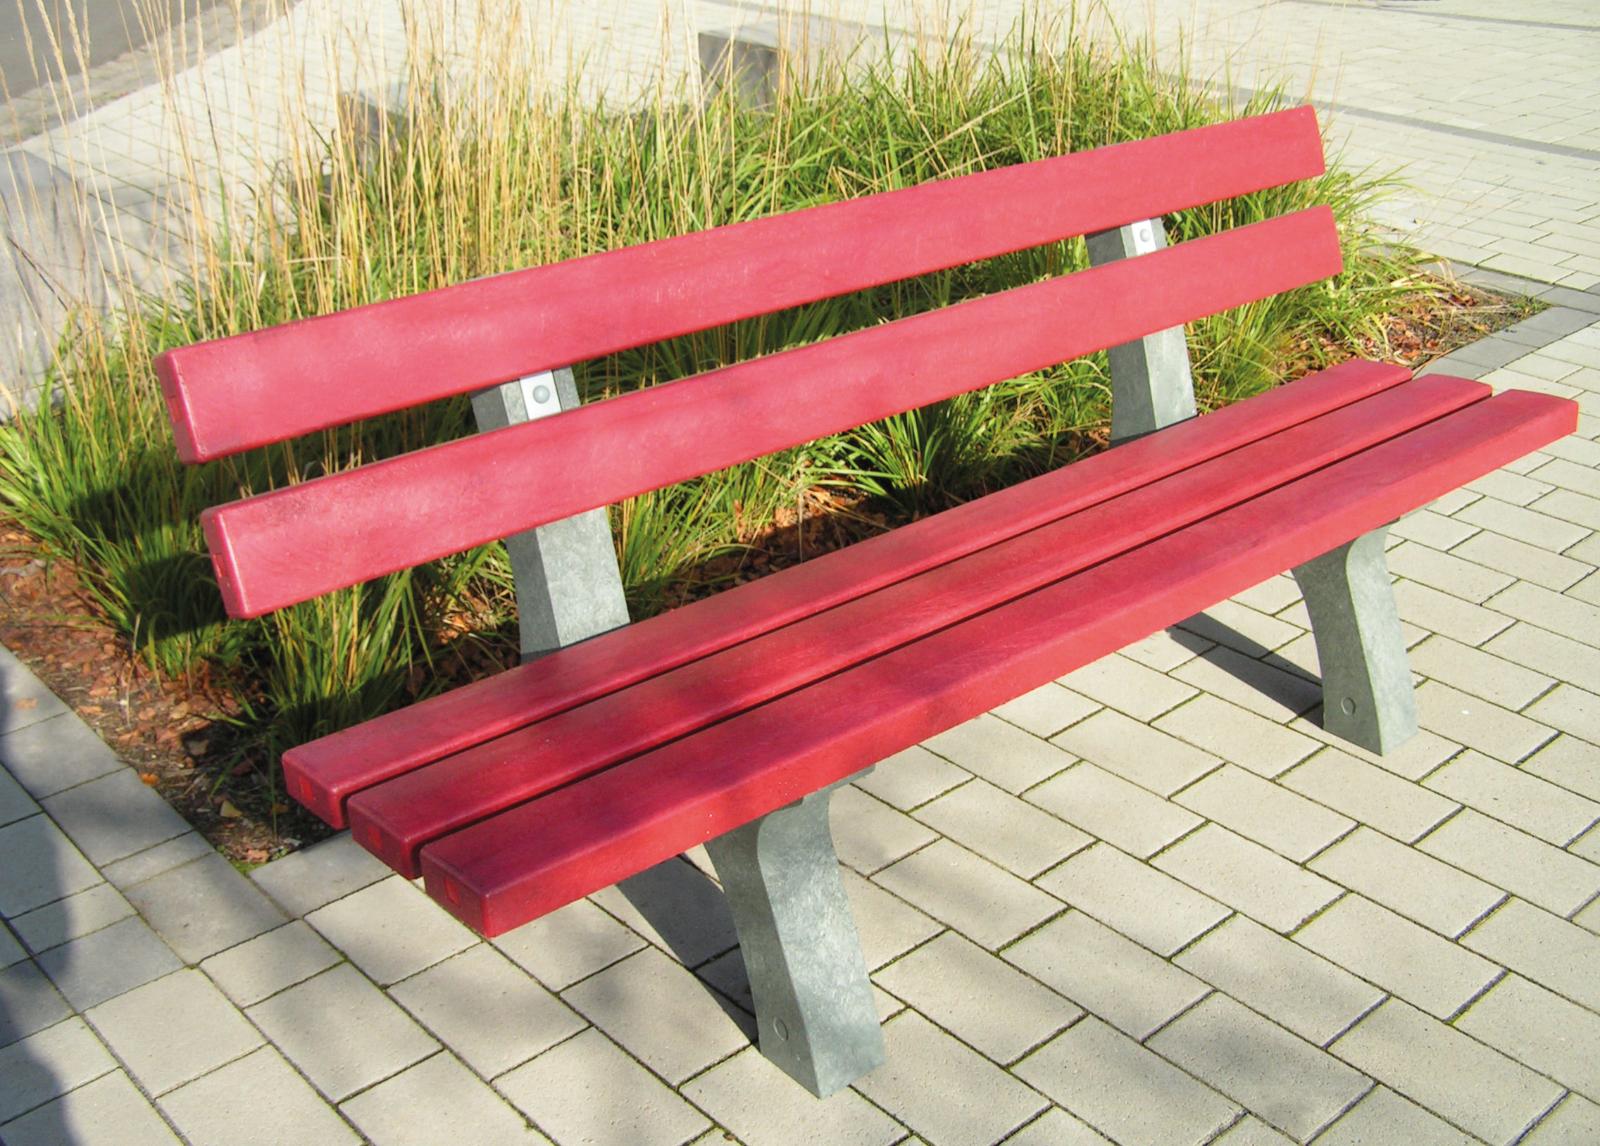 Piccadilly bench